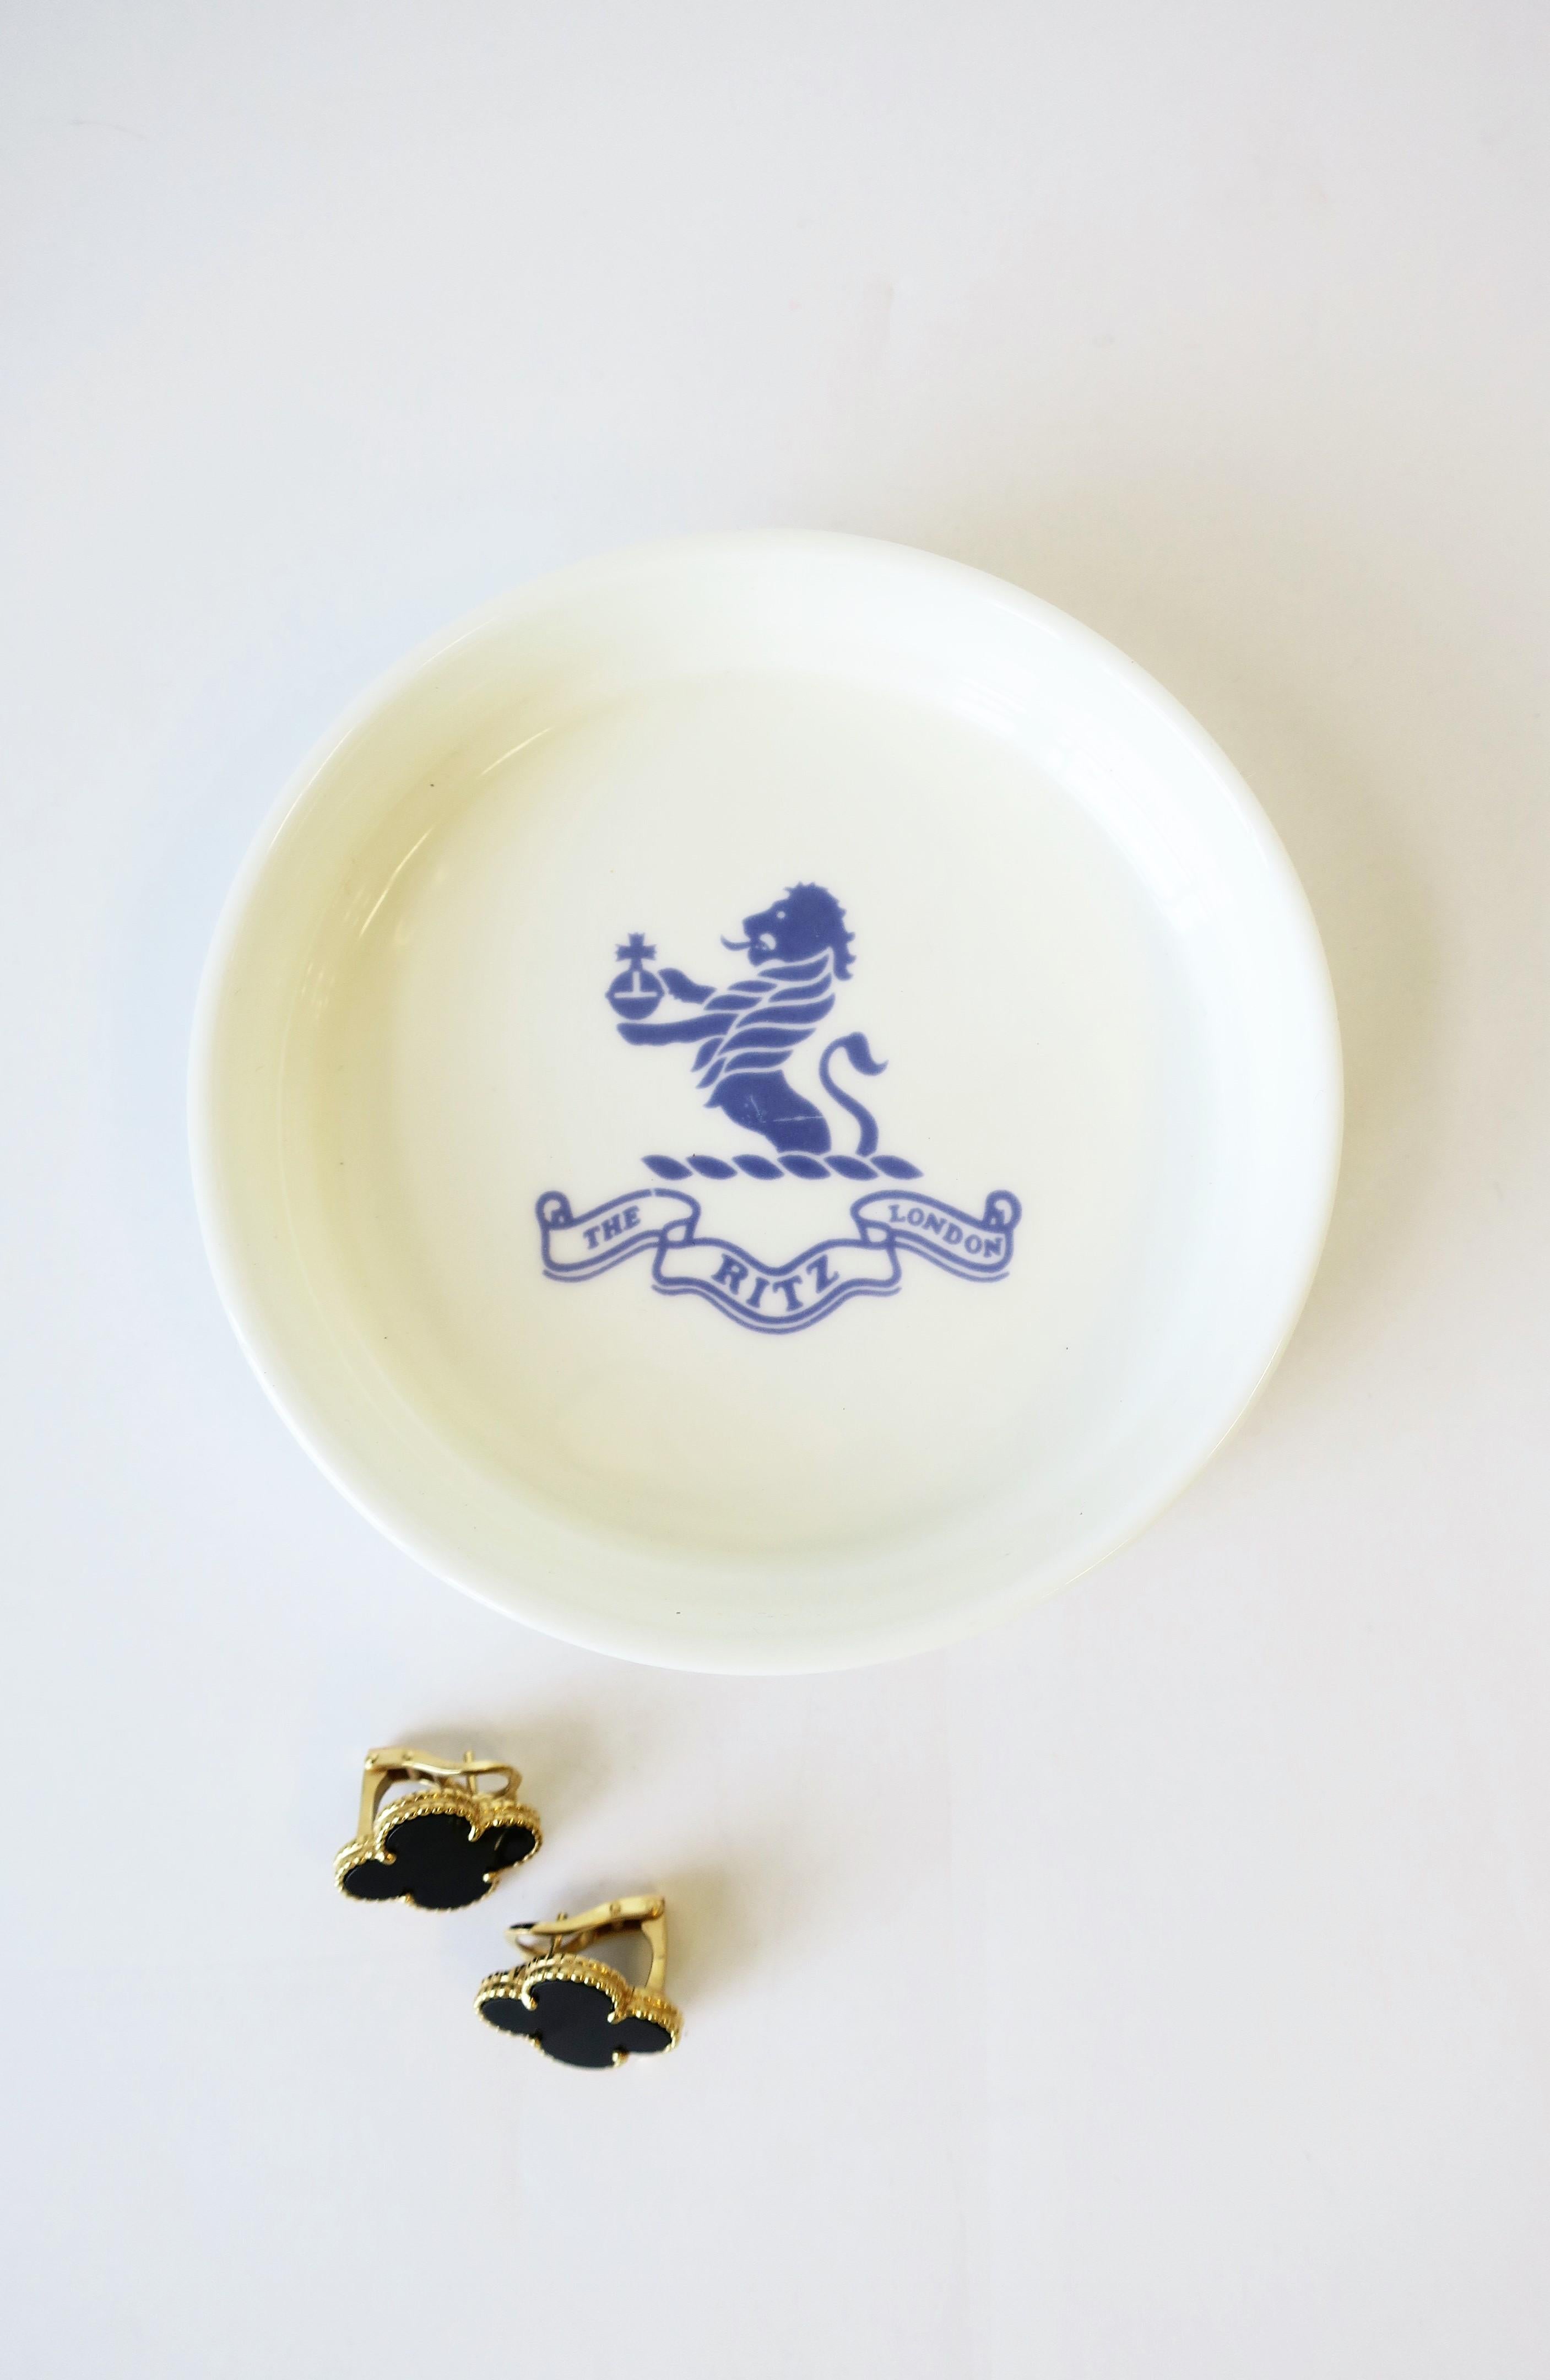 The Ritz Hotel London Blue and White Porcelain Jewelry Dish by Royal Doulton 1